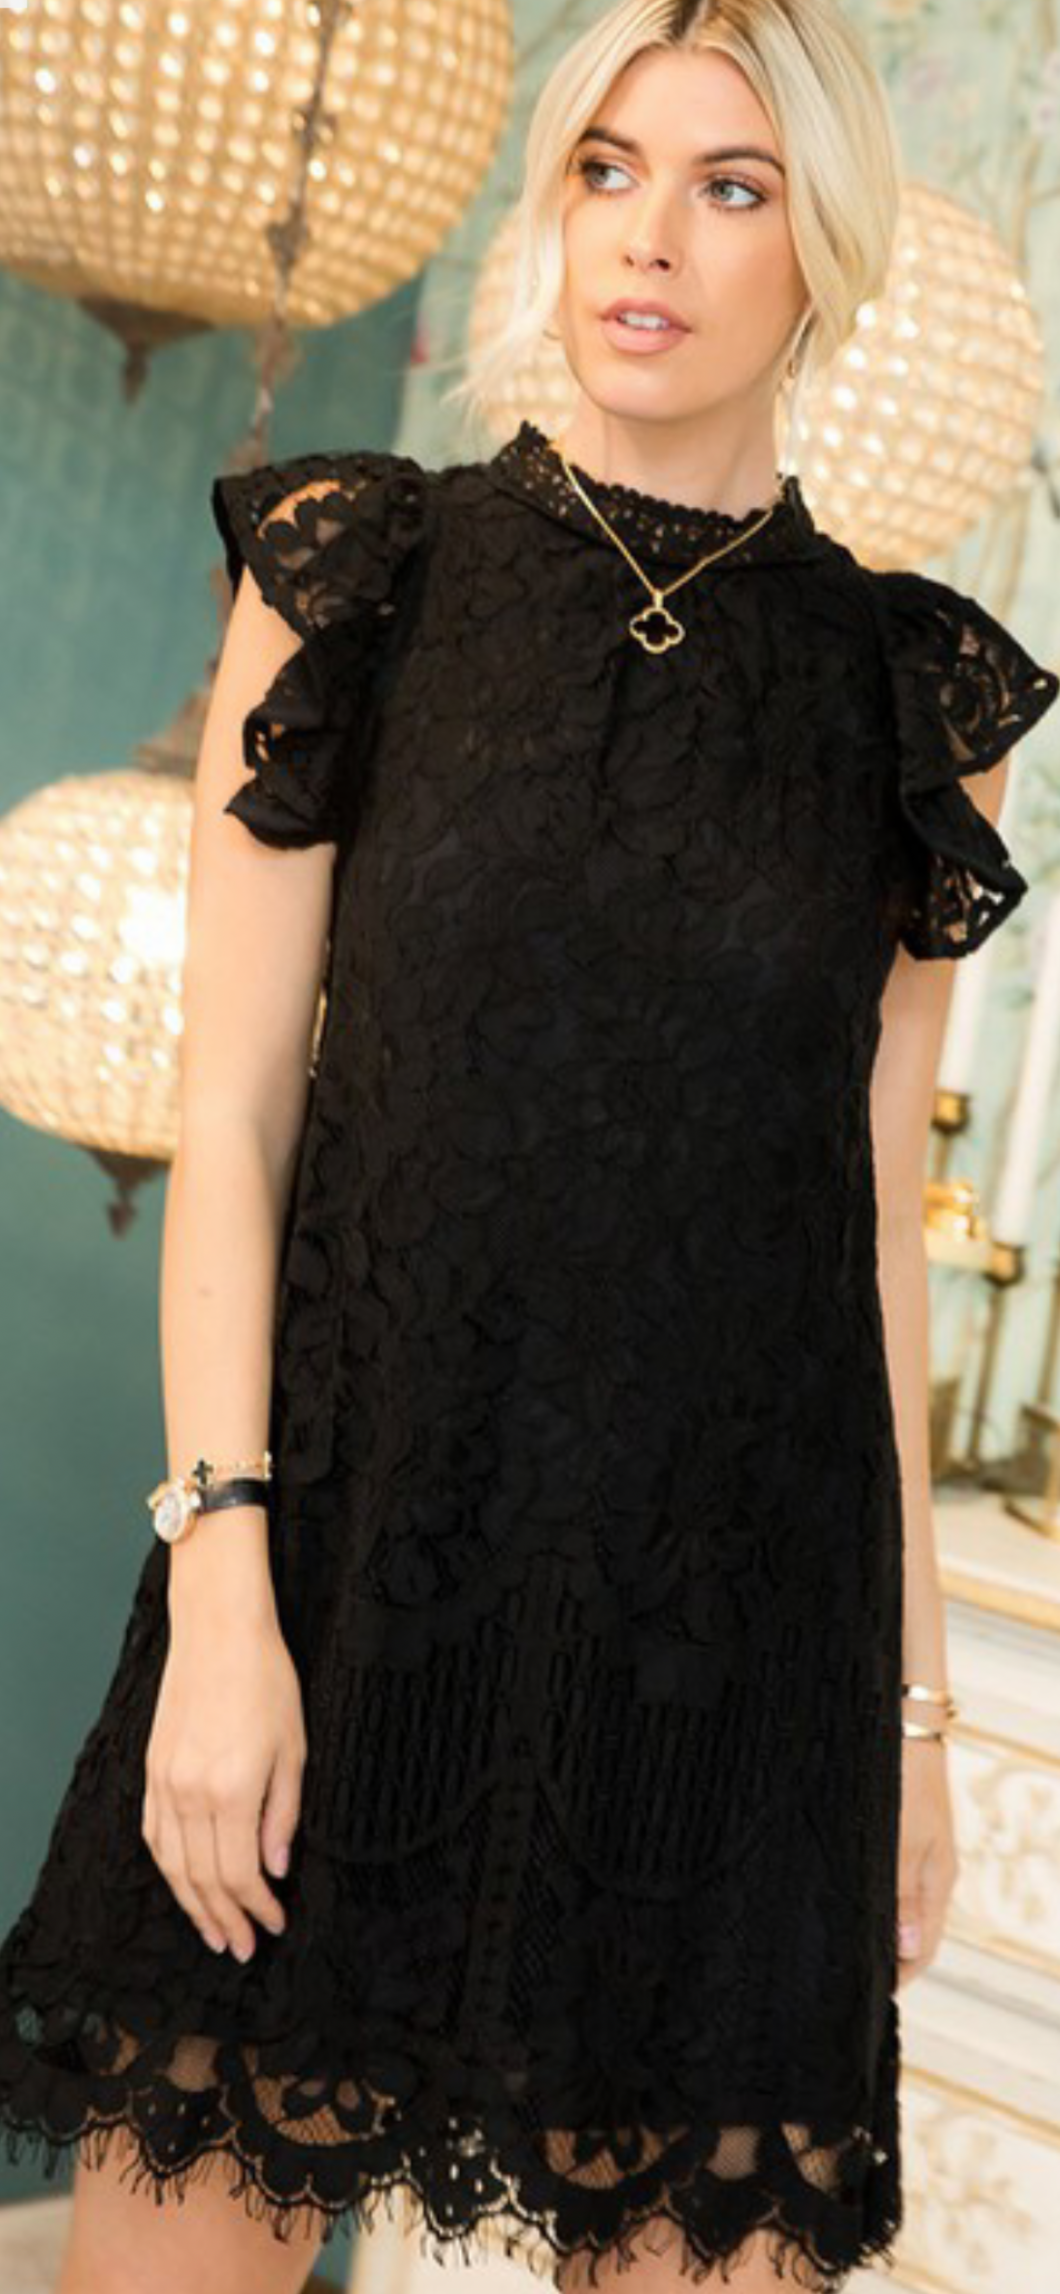 CURVY BLACK LACED DRESS WITH RUFFLE CAP SLEEVES